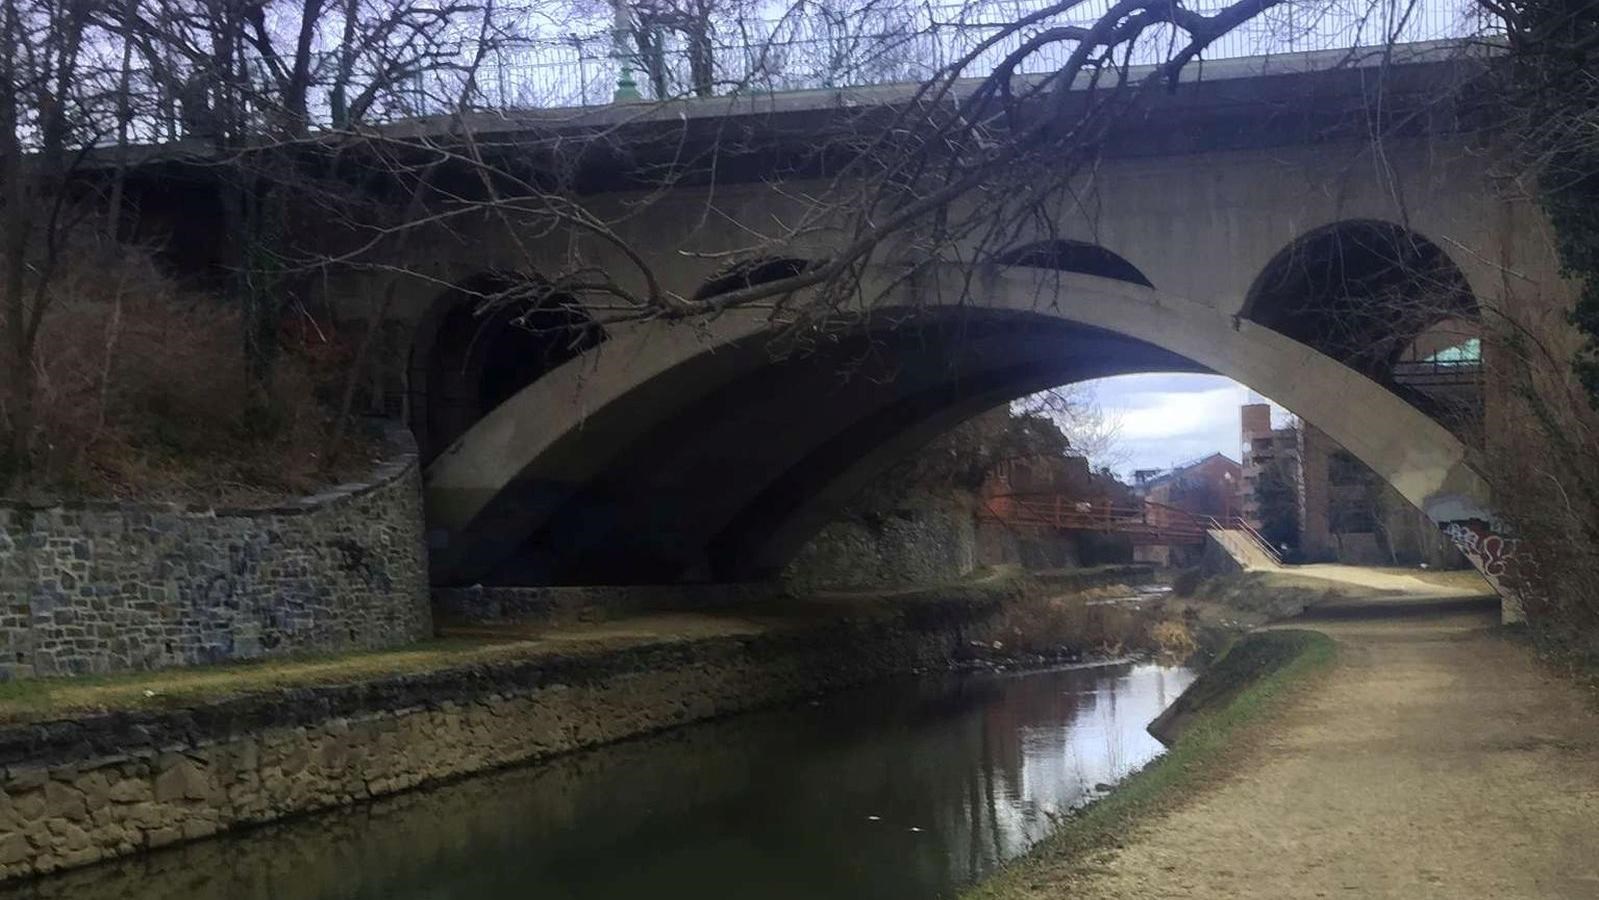 A Concrete bridge arches over a watered canal. A path of loose stone runs parallel to the canal.